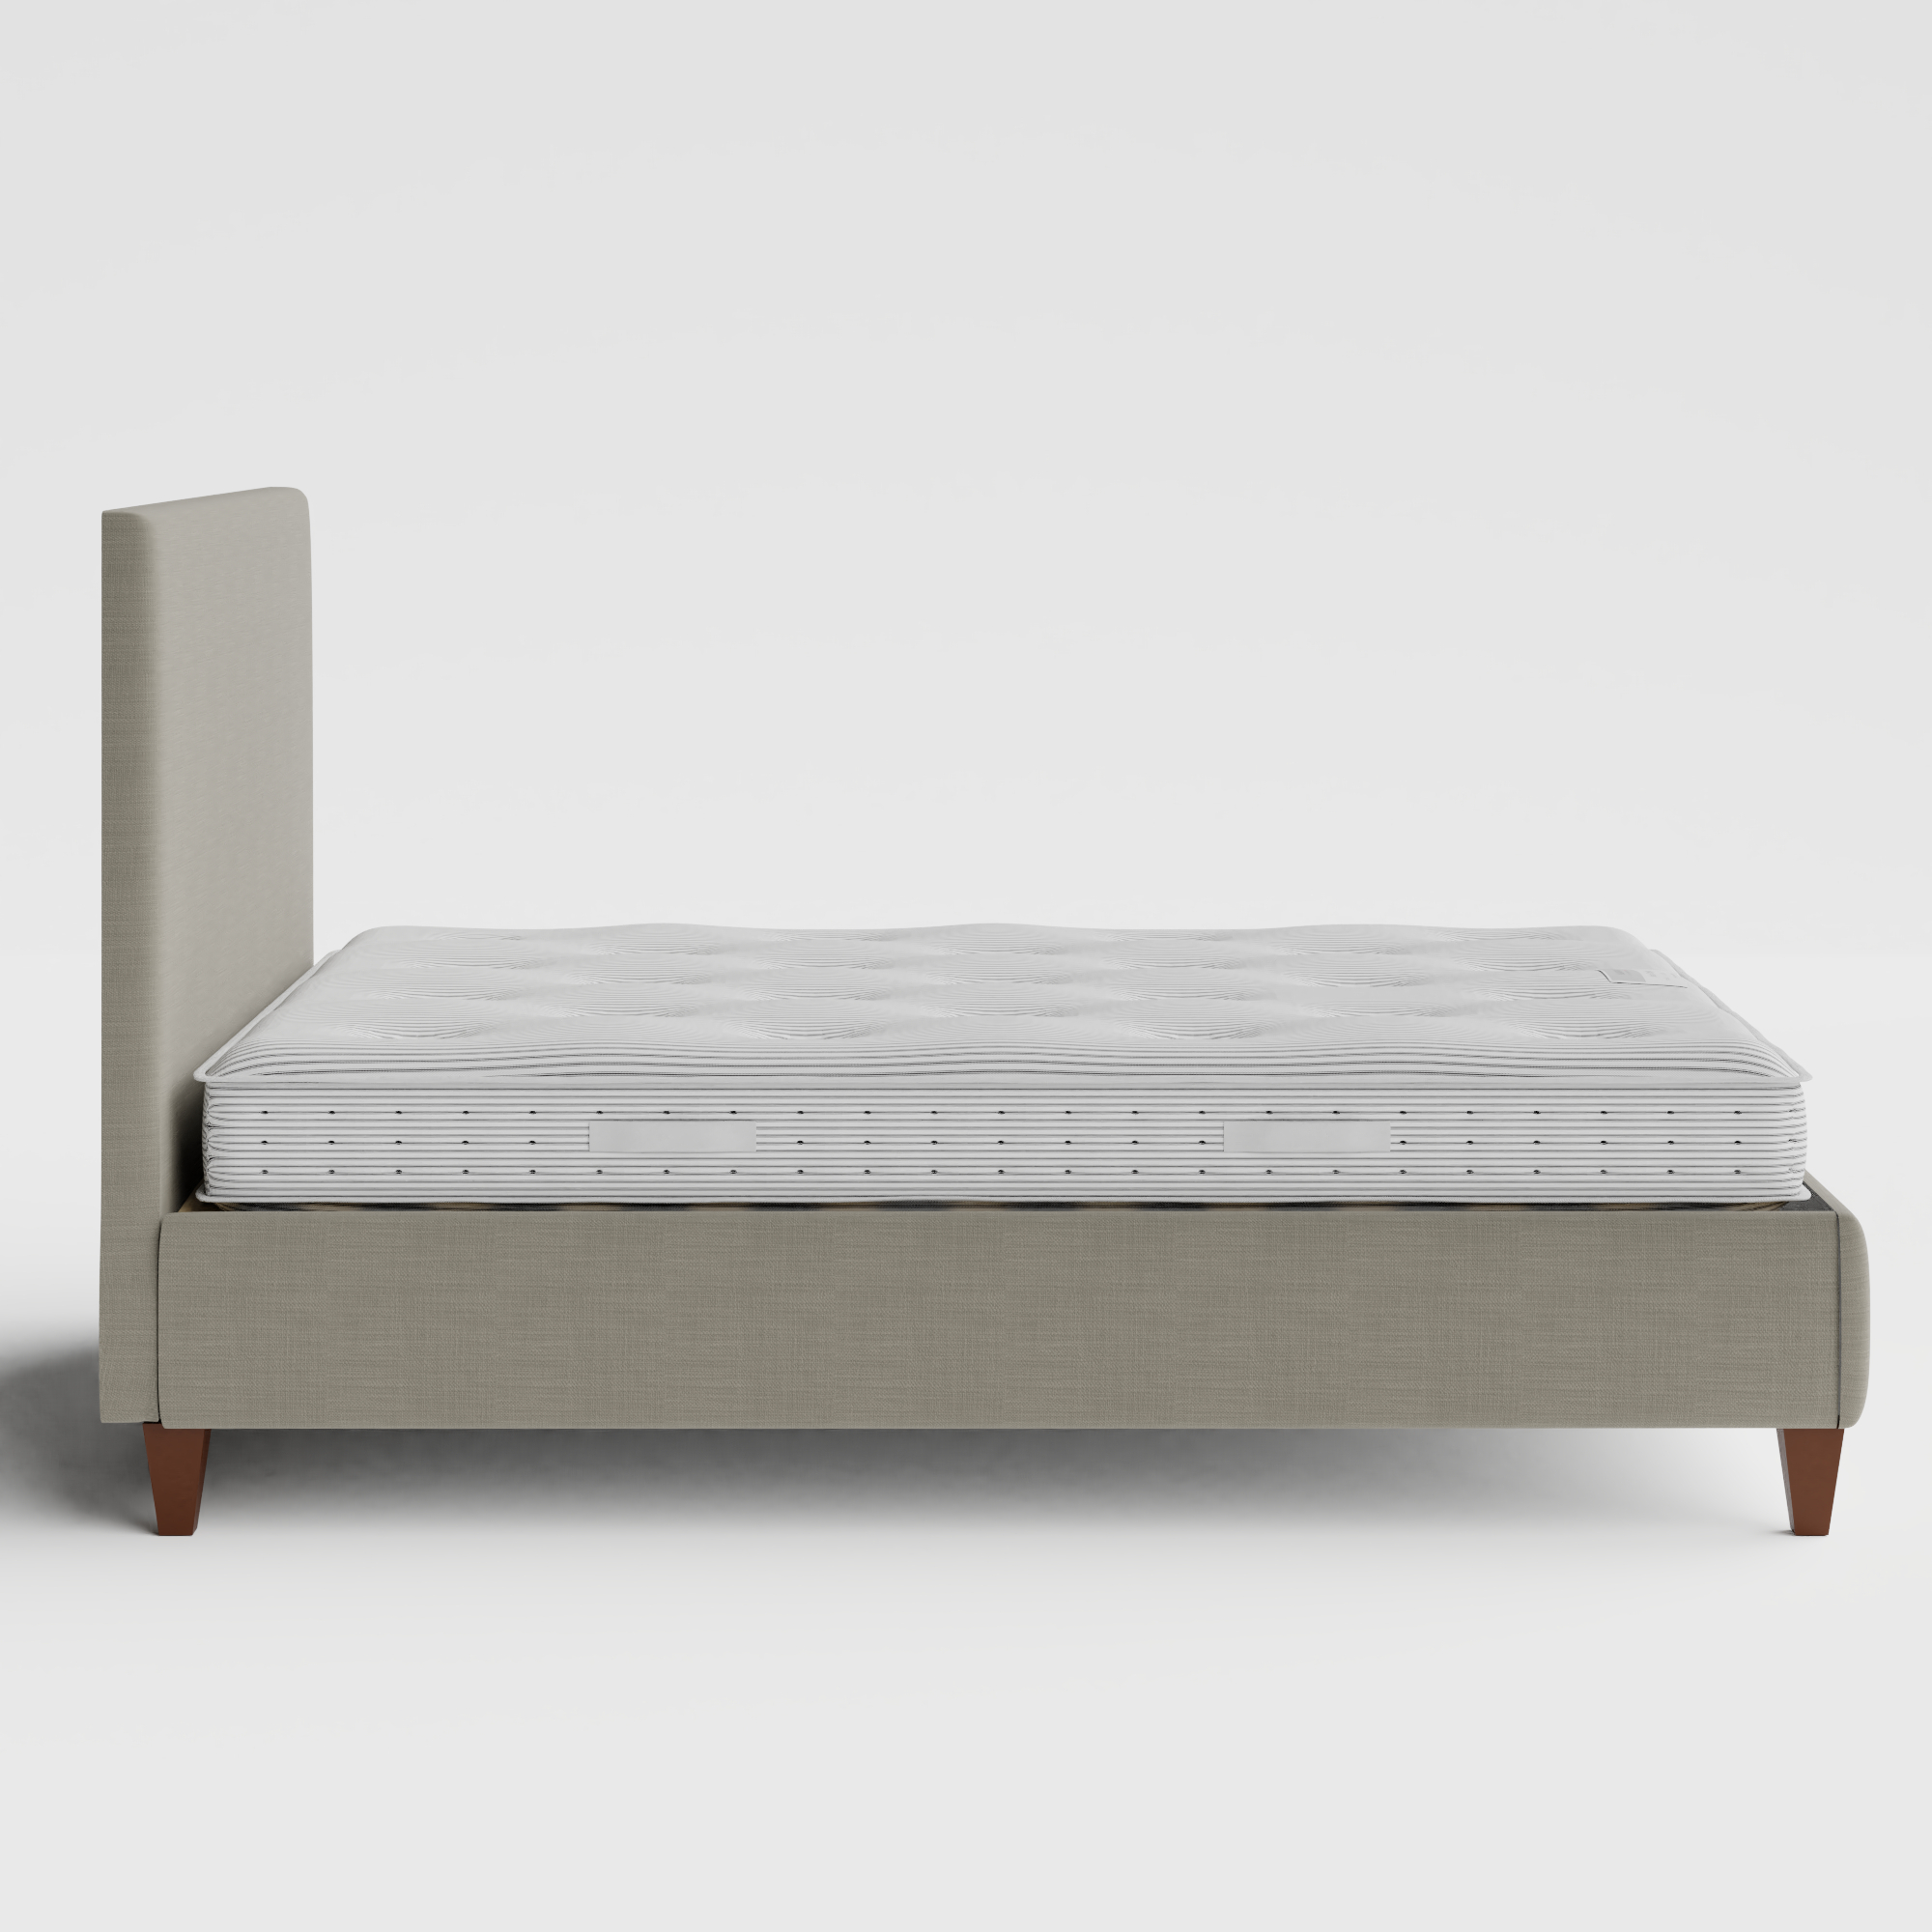 Yushan upholstered bed in grey fabric with Juno mattress